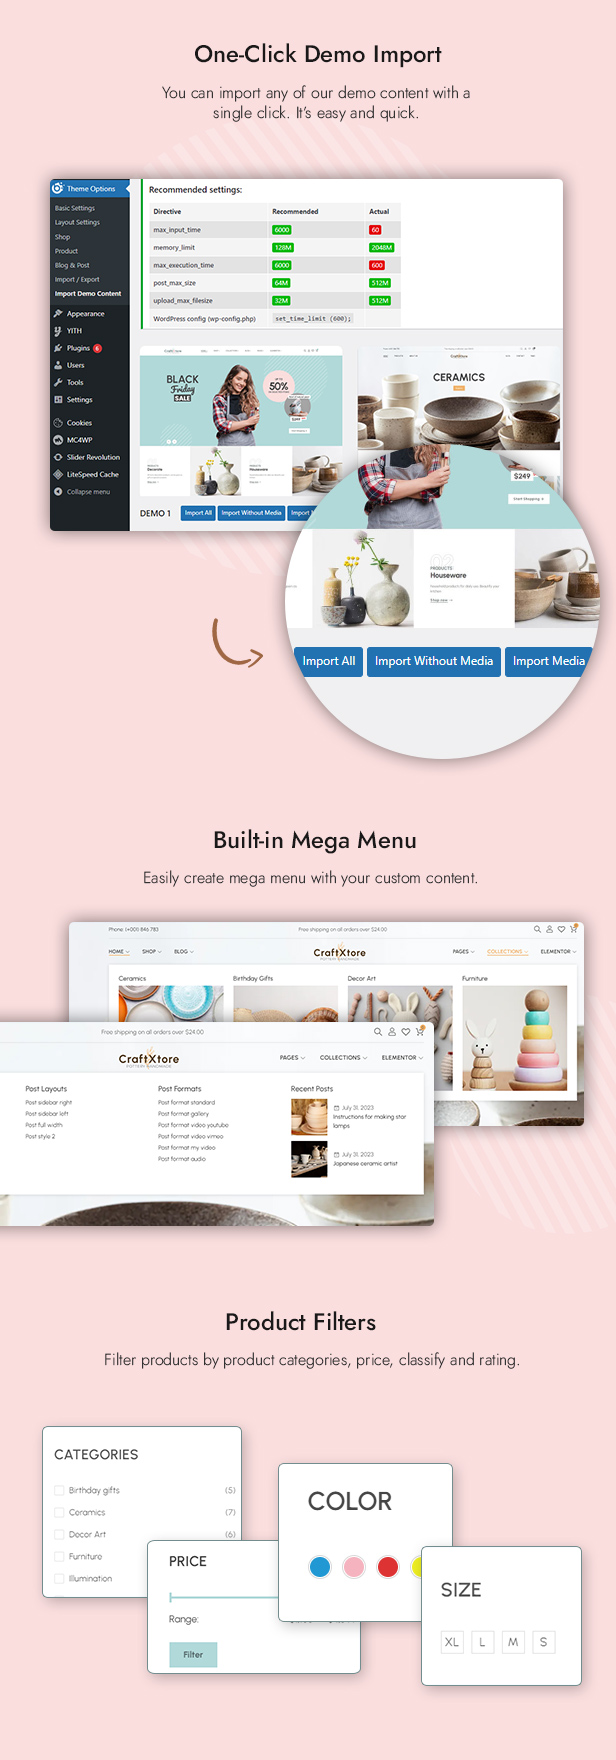 CraftXtore - Handmade, Ceramics and Pottery Shop WooCommerce Theme - 9